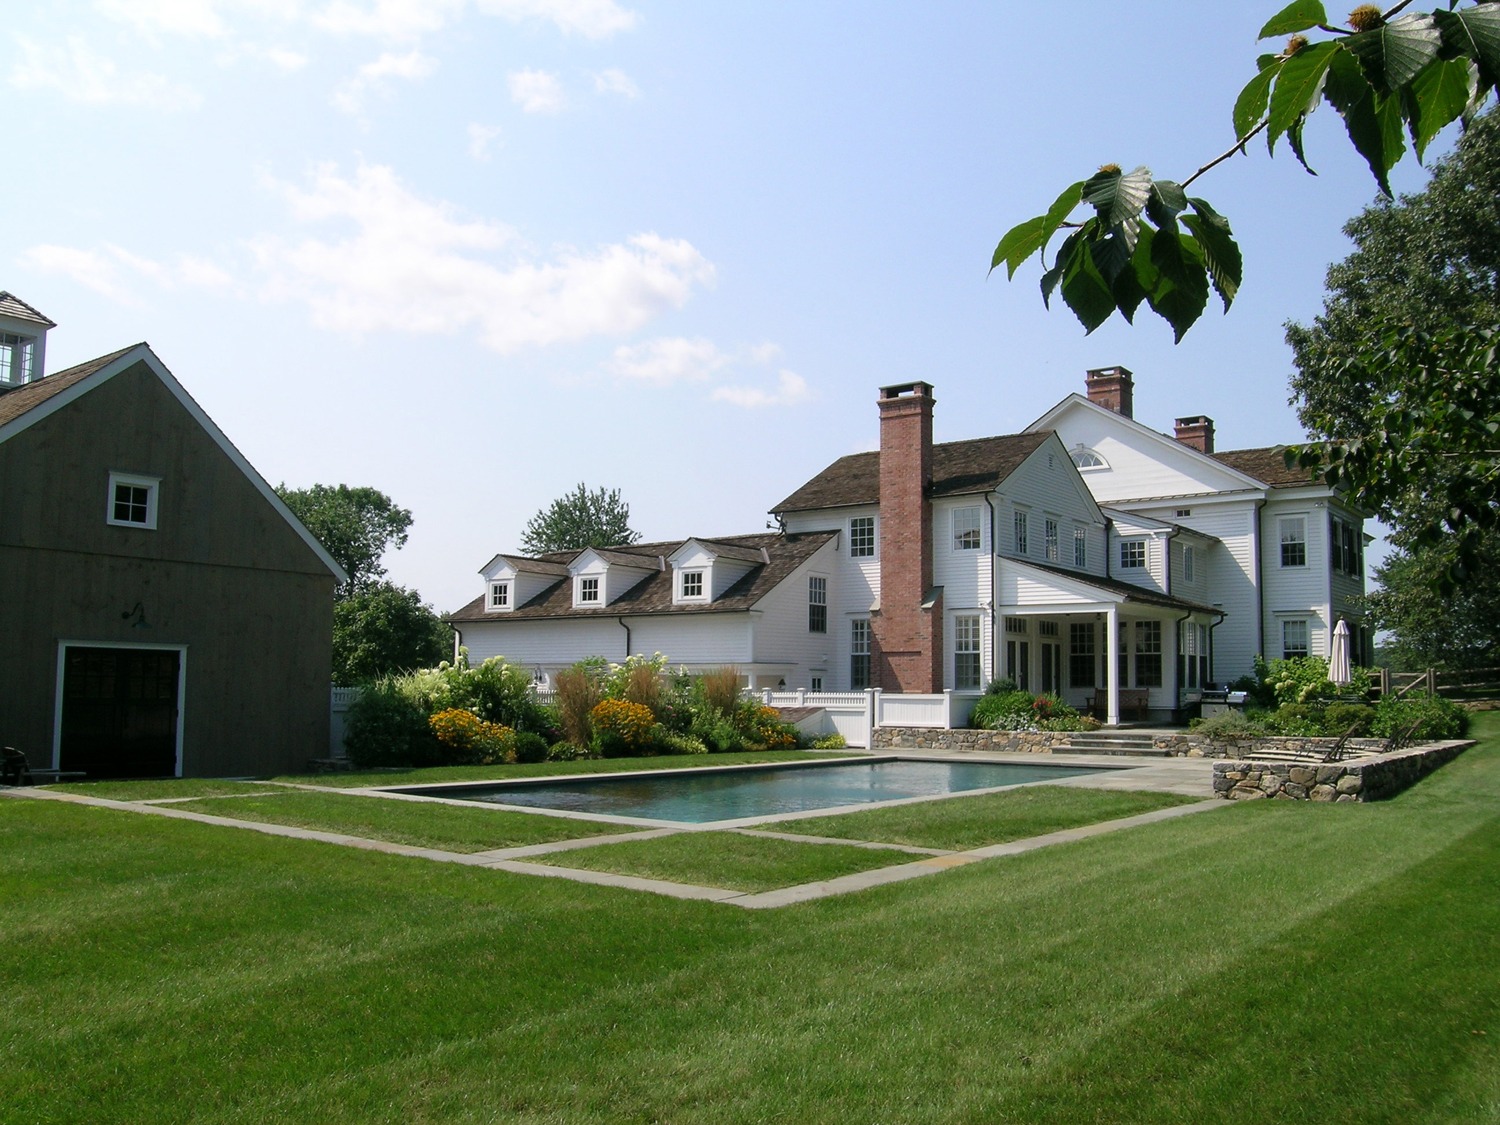 This image shows a large white house with multiple chimneys, a swimming pool, a green lawn, and an adjacent grey barn-like structure under a clear sky.